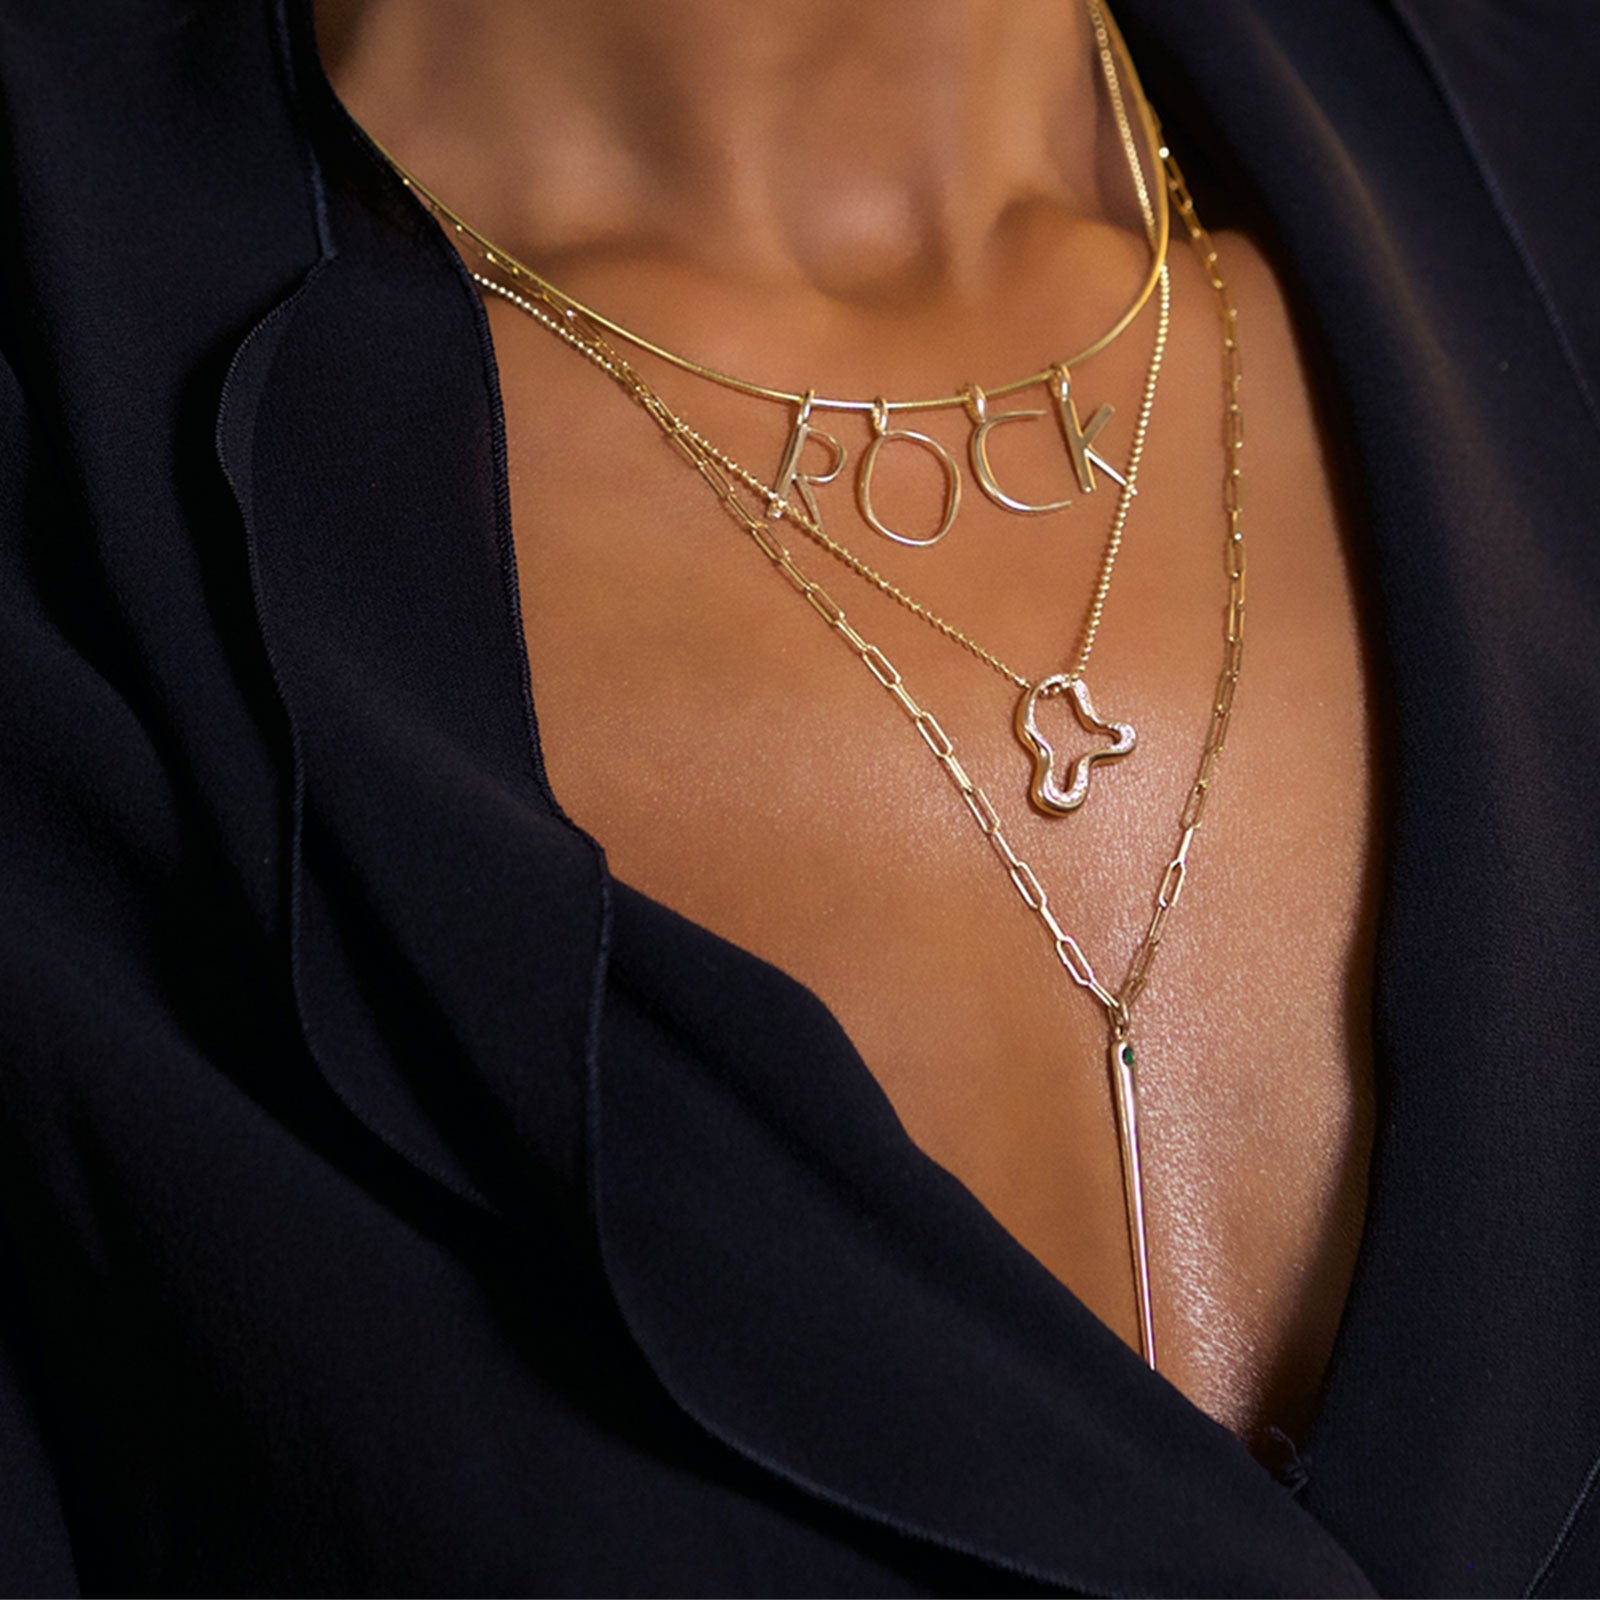 14K yellow gold R, O, C, and K letter charms styled on a neck layered with the wire choker necklace.